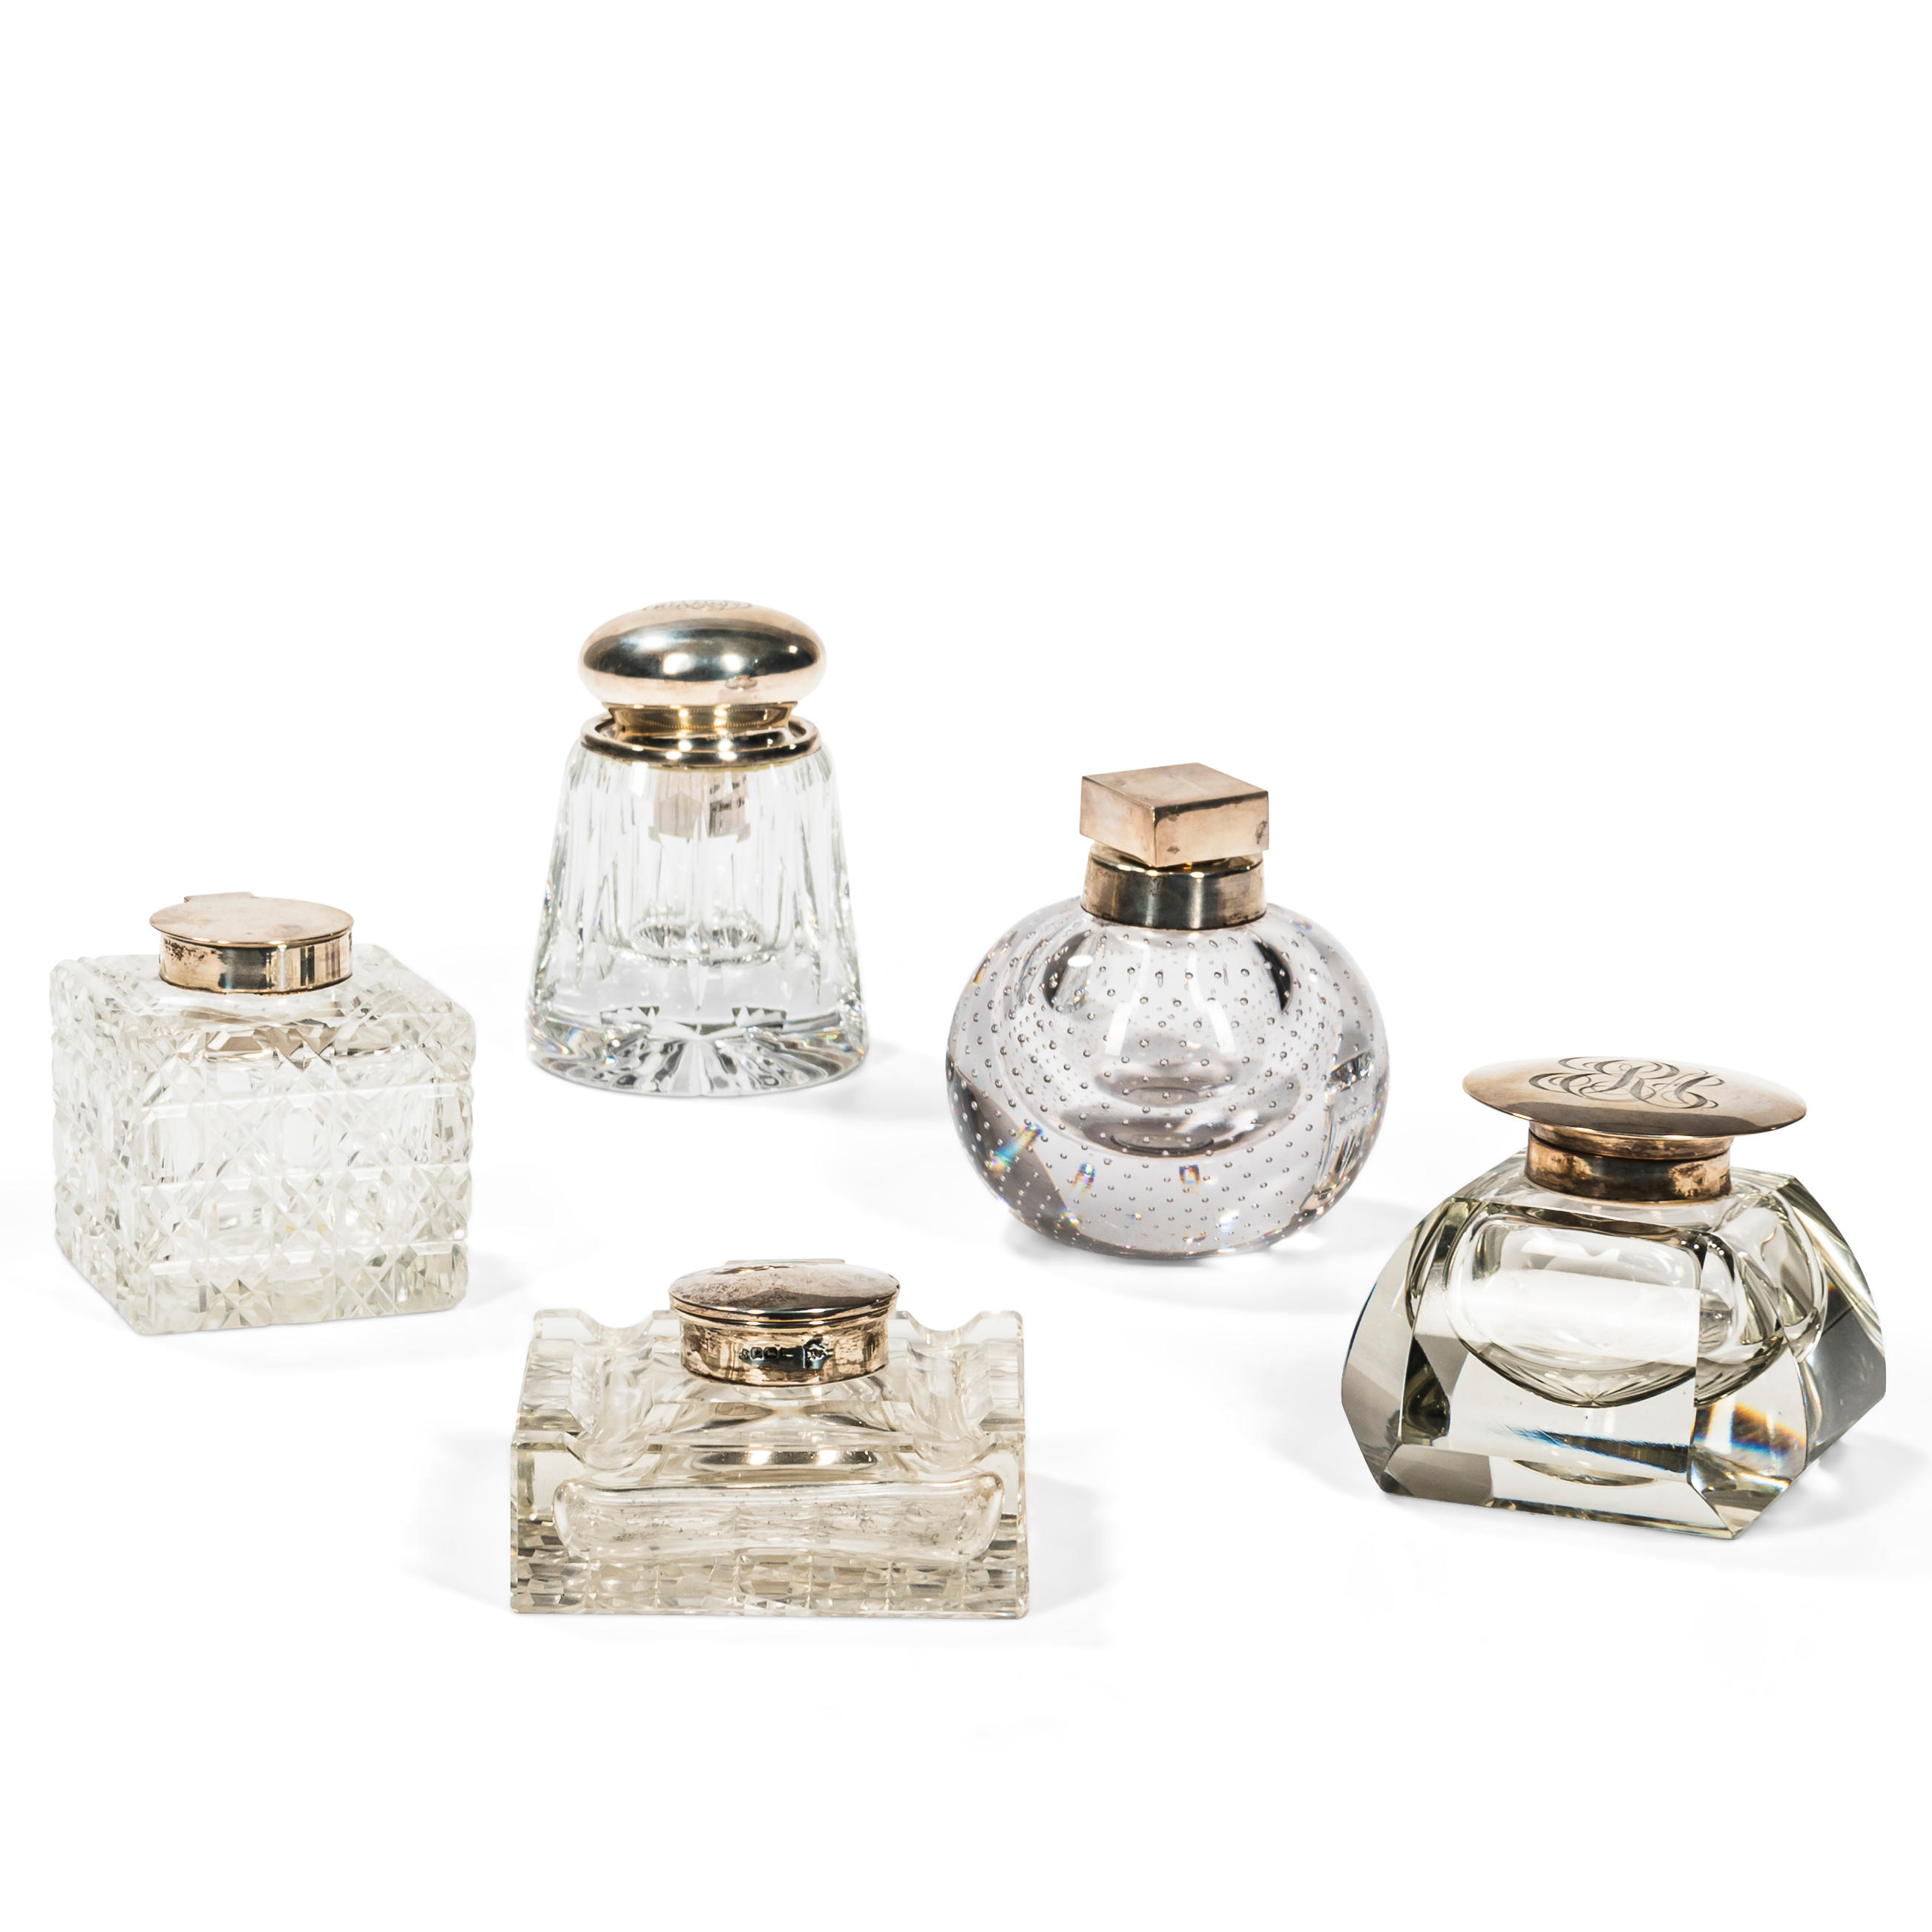 FIVE COLORLESS GLASS INKWELLS All 3aec7e